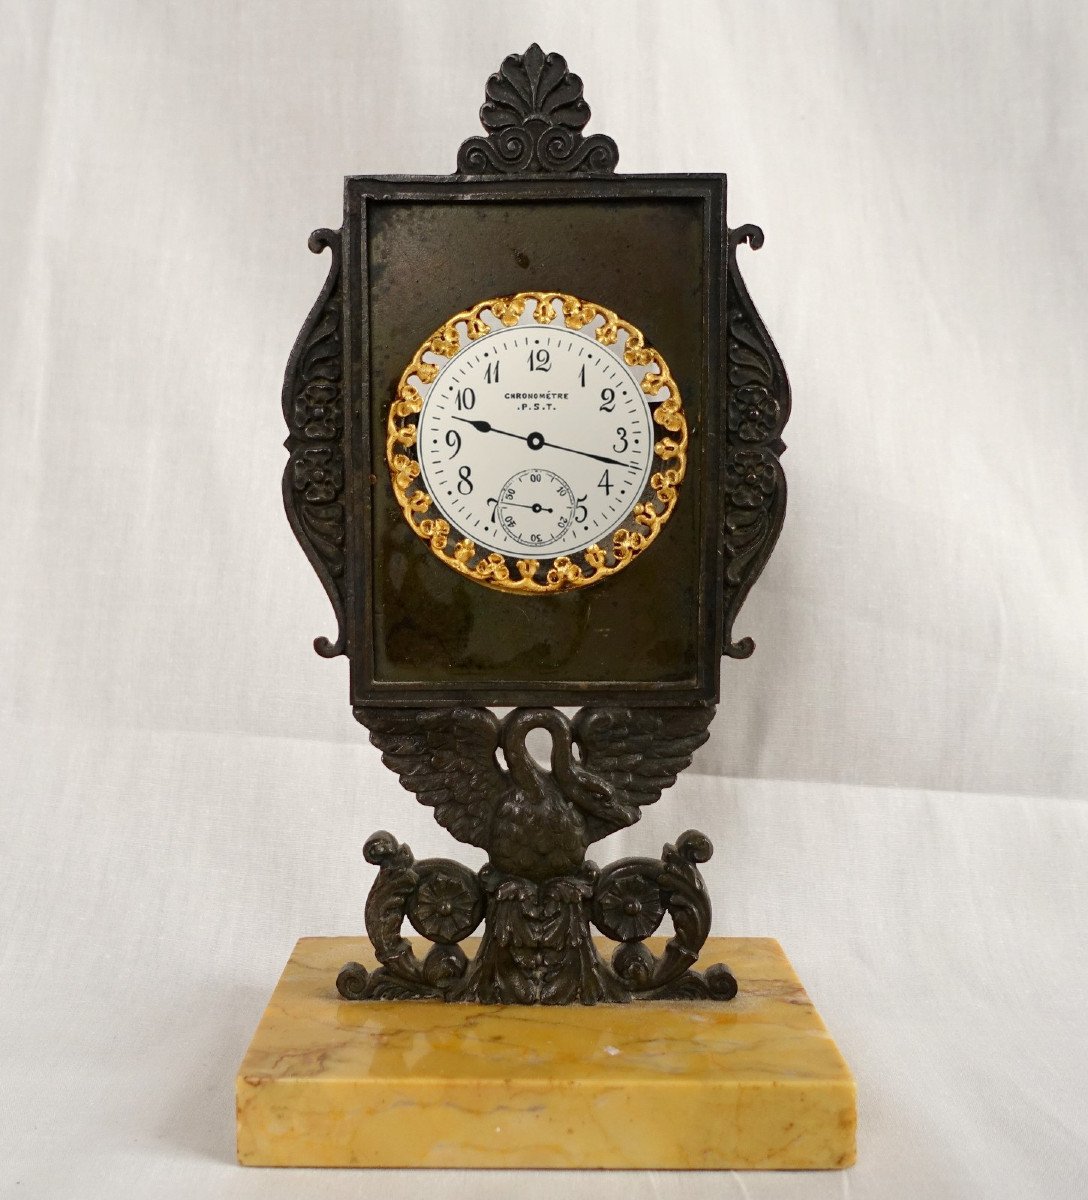 Watch Holder In Bronze And Marble - Neoclassical Work From The Empire Restoration Period - Ca 1820